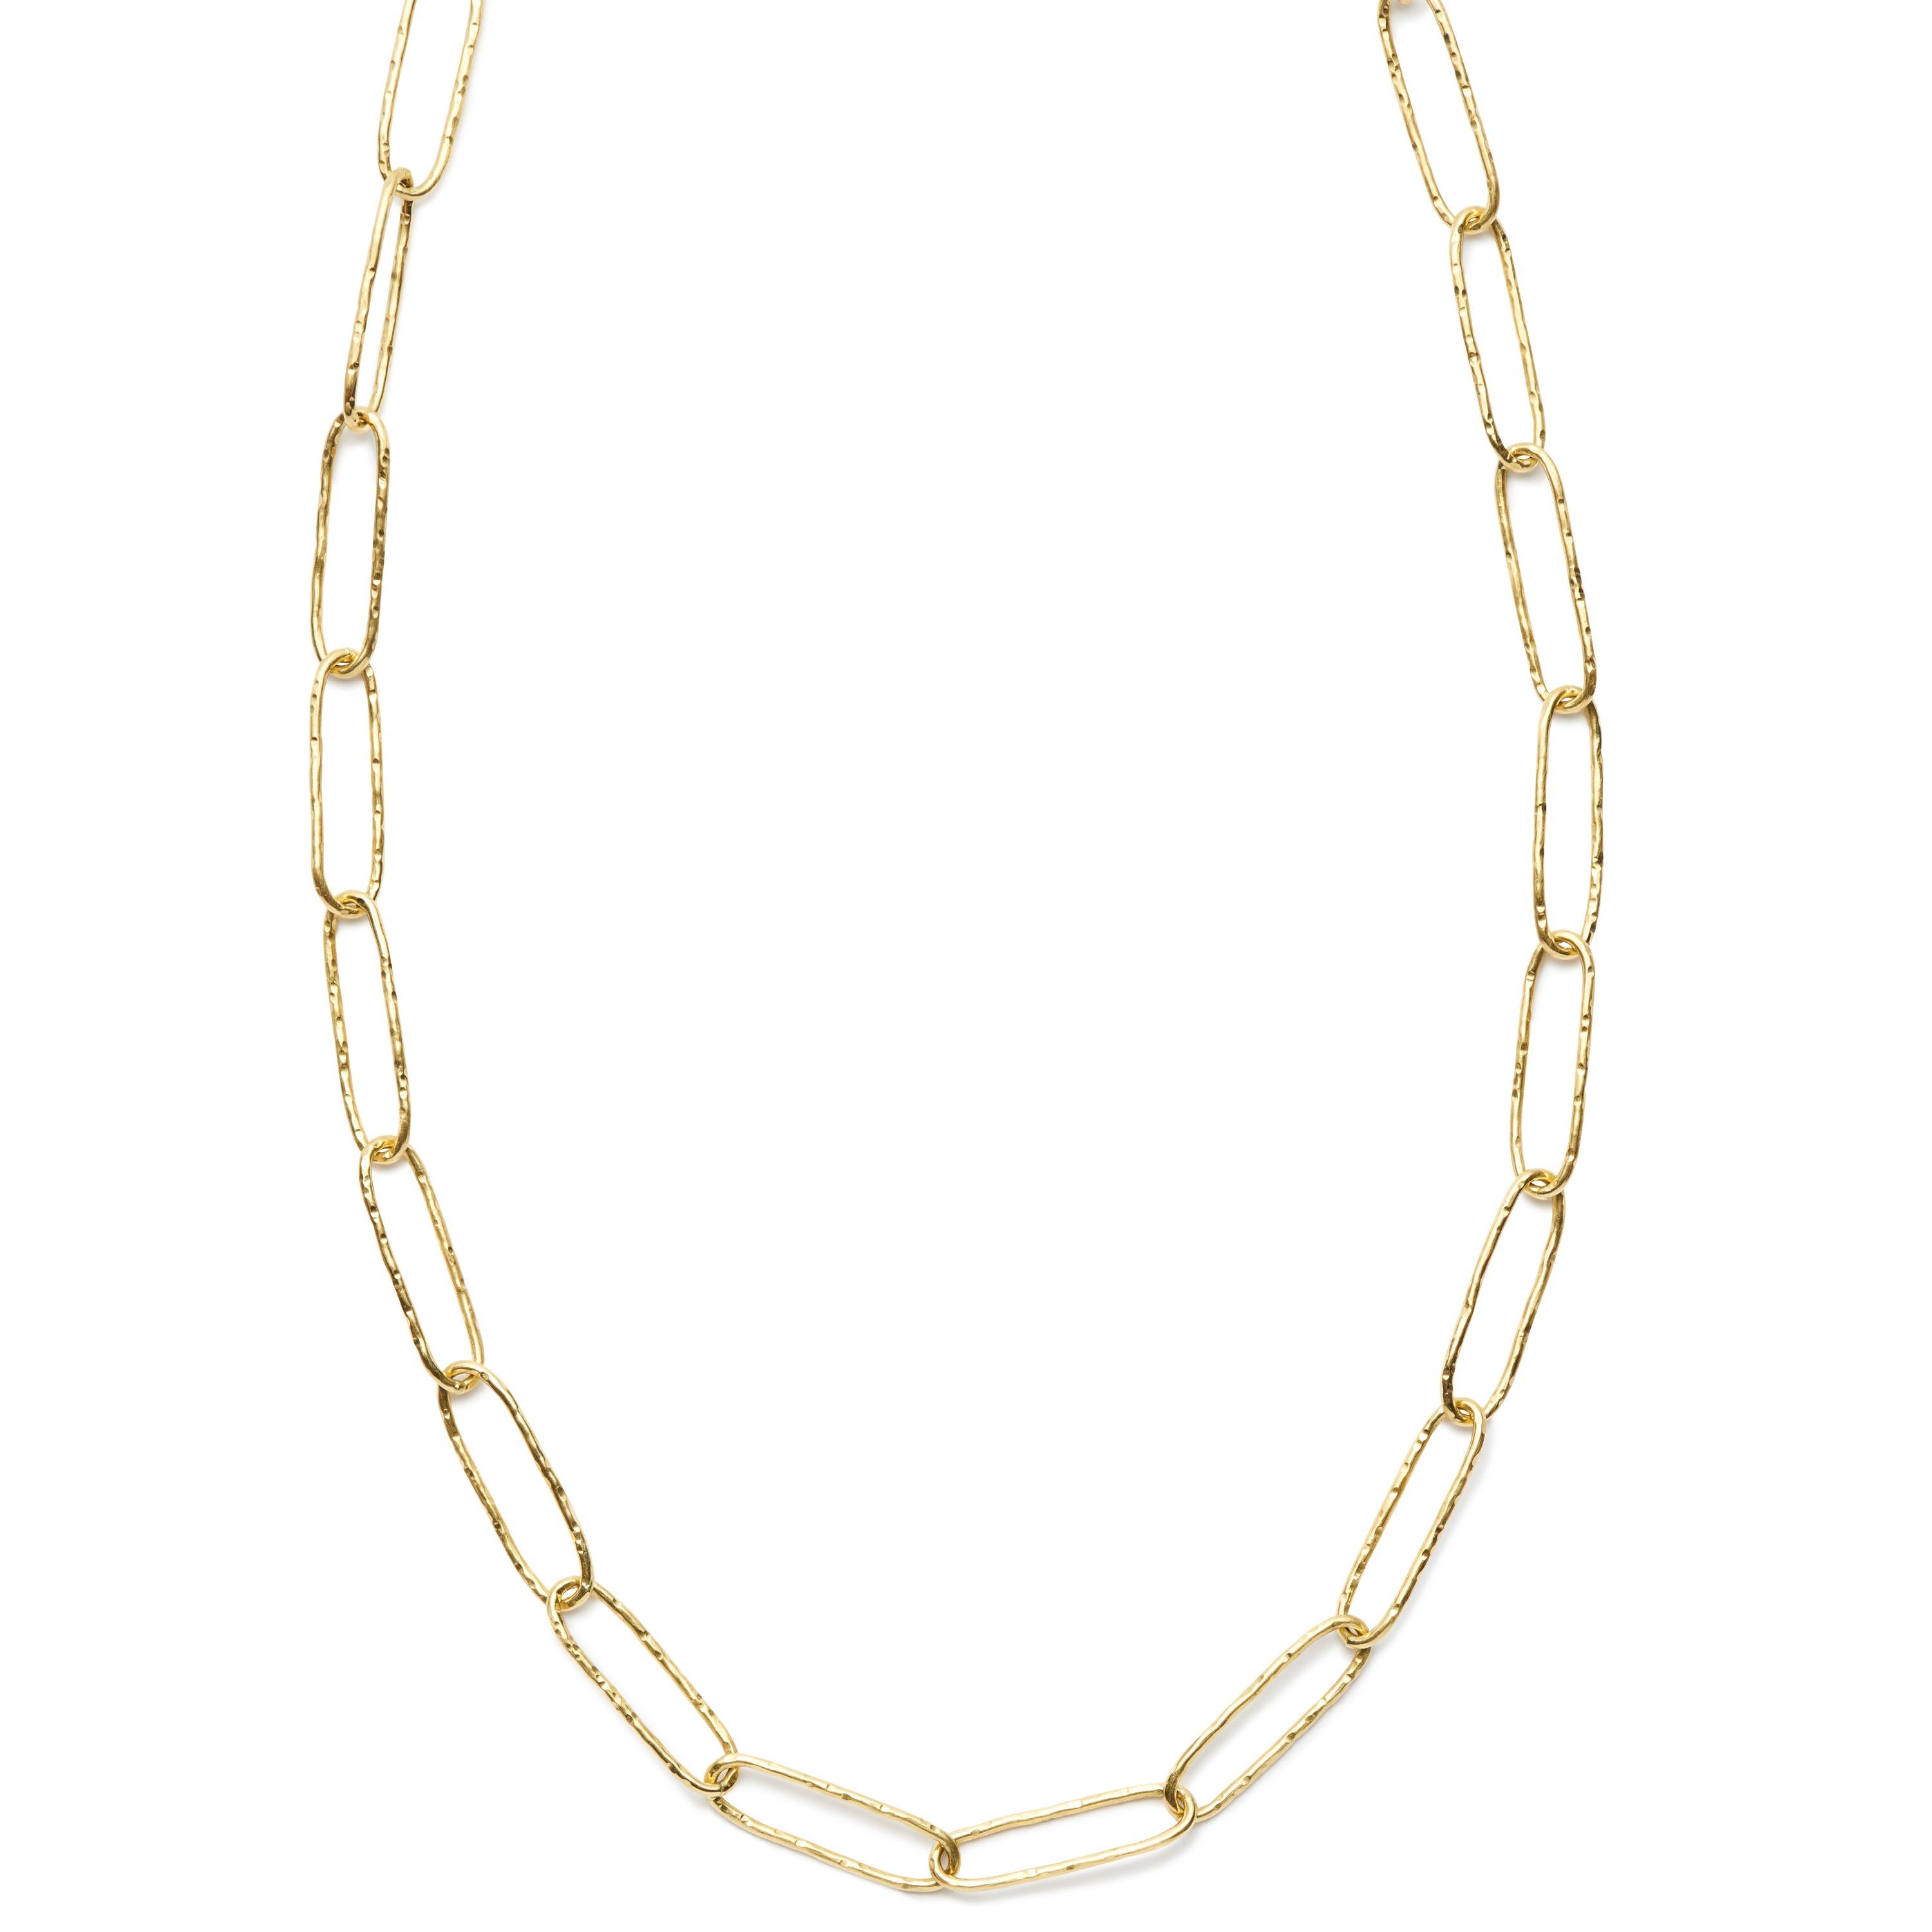 A modern accessory with a twist. This fun and fashionable 27-inch hand-hammered necklace, crafted in a paper clip design, can be worn on its own or layered with other chains or pearls. Available in 18 Karat Gold and Sterling Silver.
